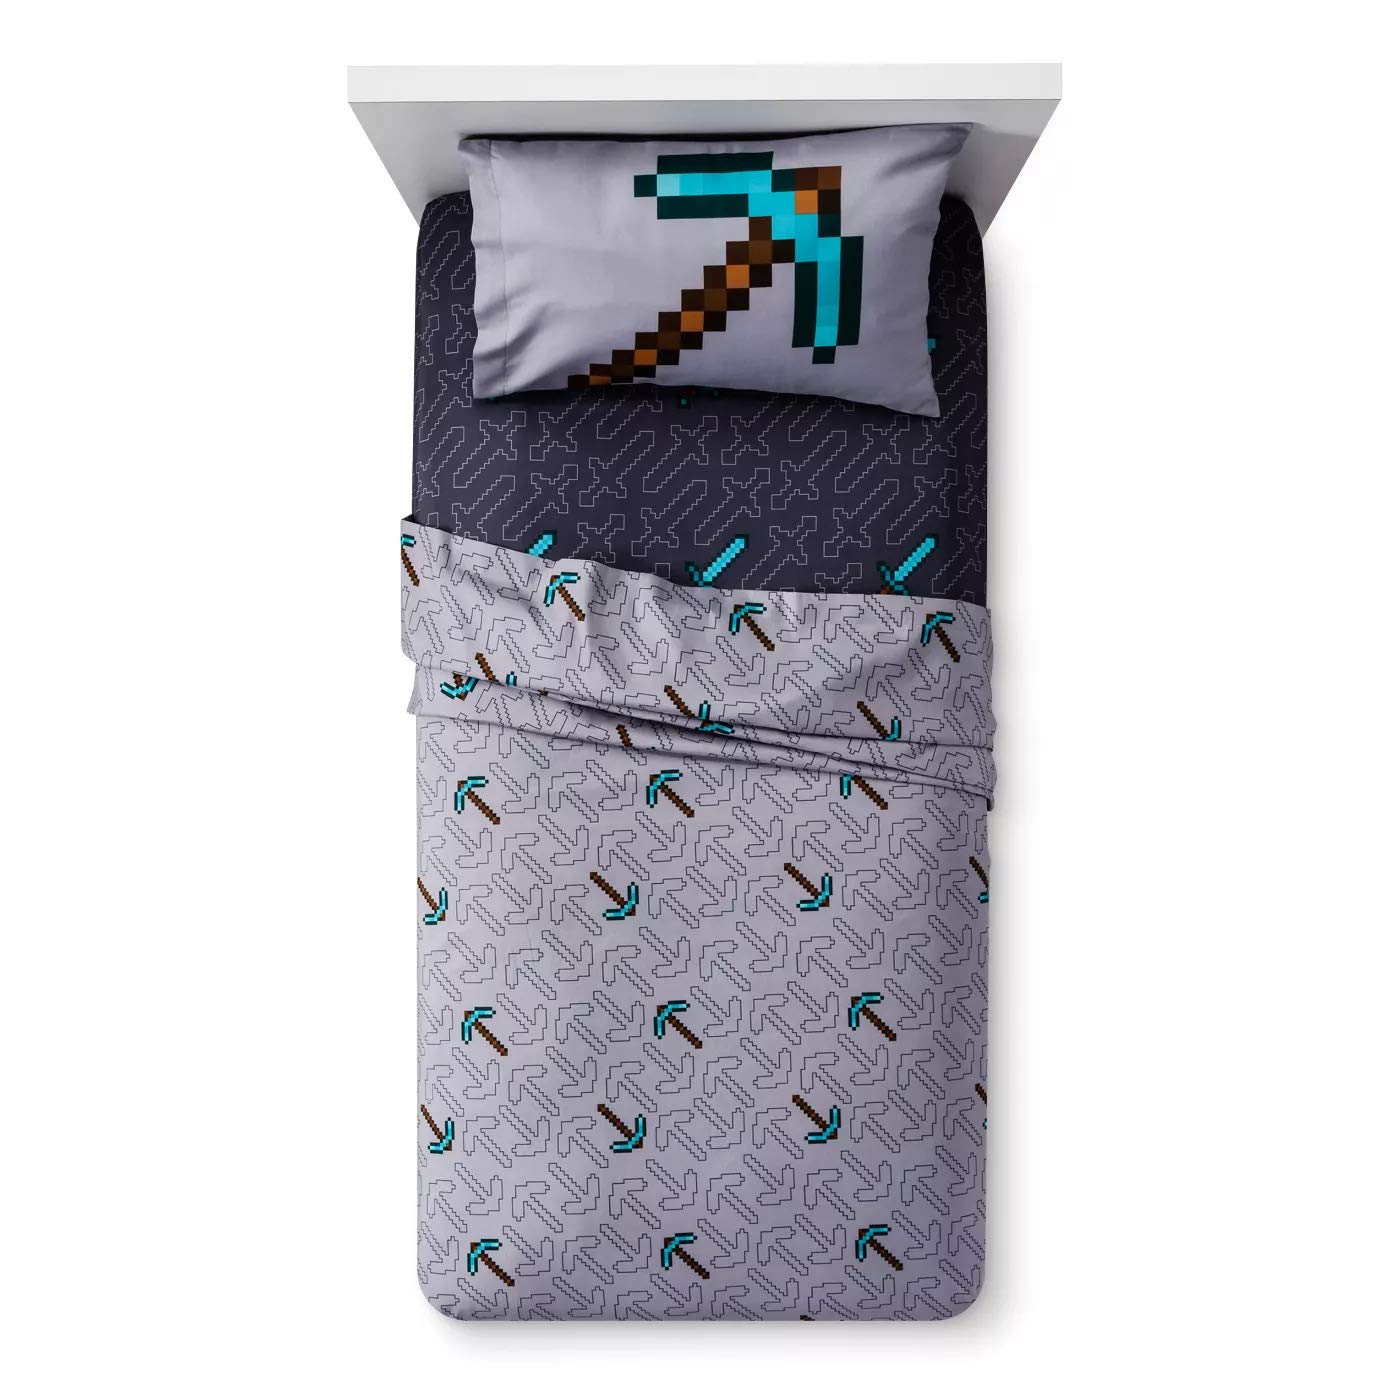 Minecraft Full Size Bedding Sheet Set, 4 Pieces (One Fitted, One Flat, Two Pillowcases)